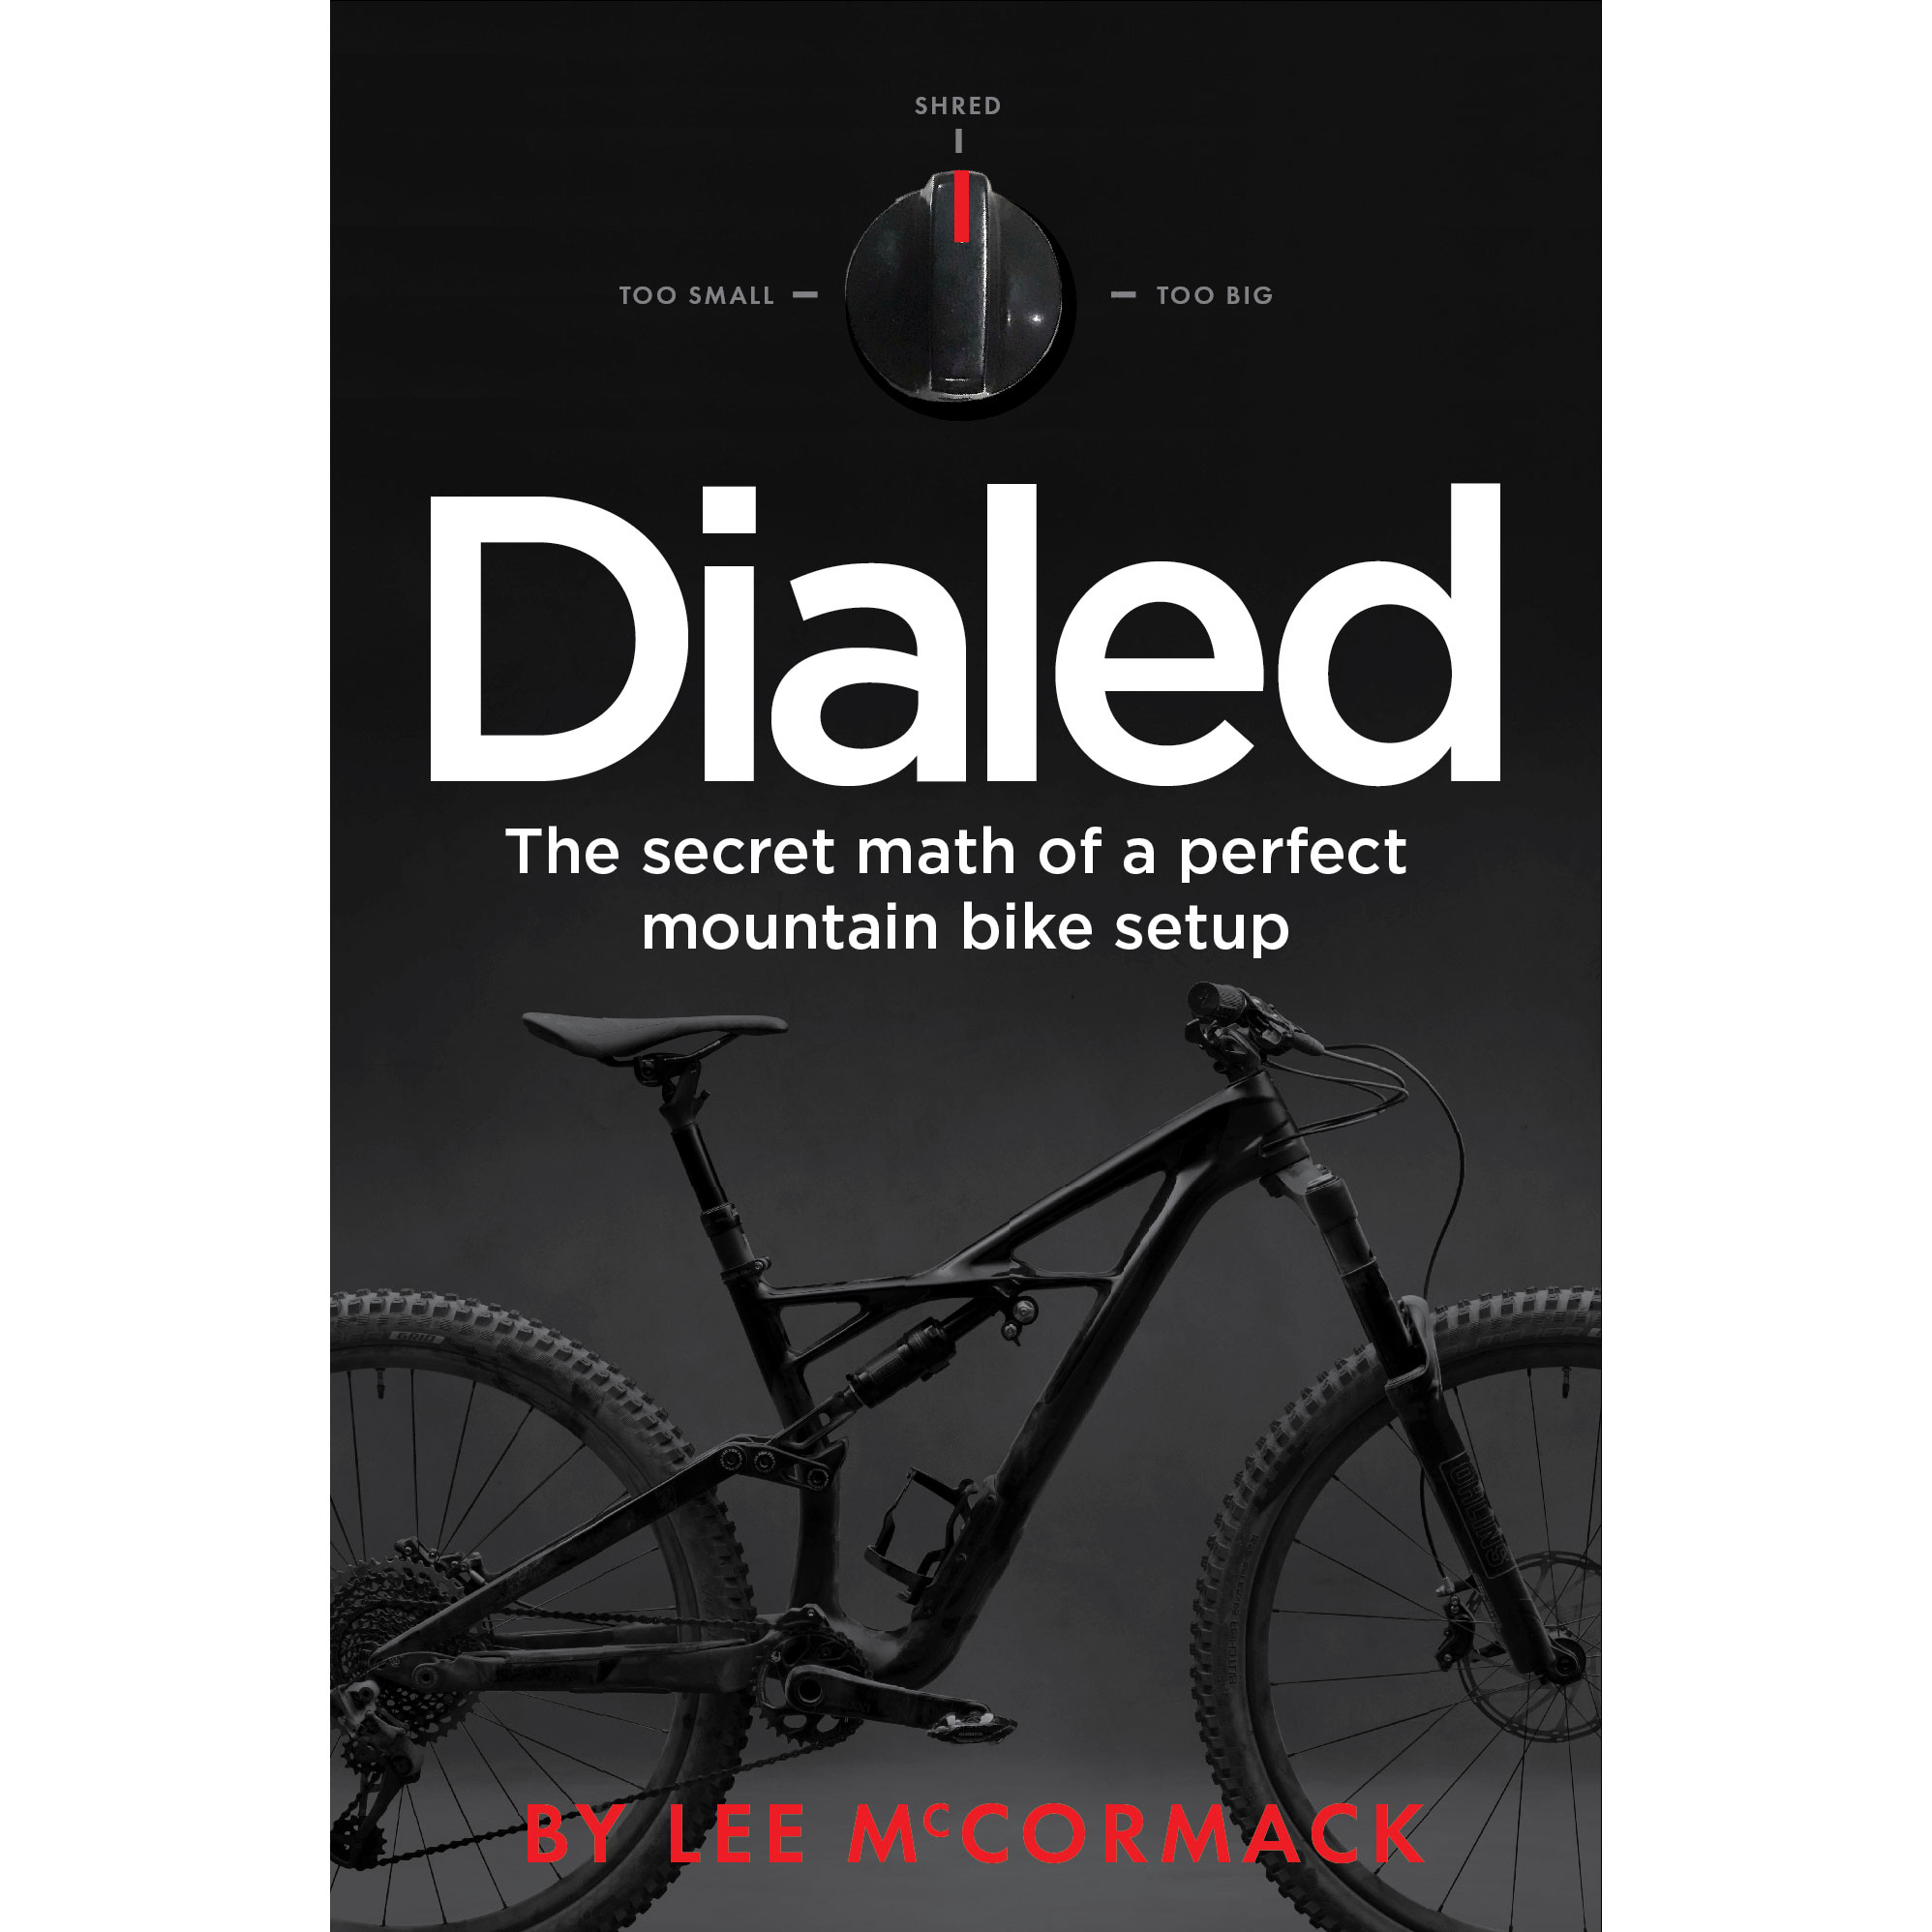 Dialed is available as an e-book at www.llbmtb.com.